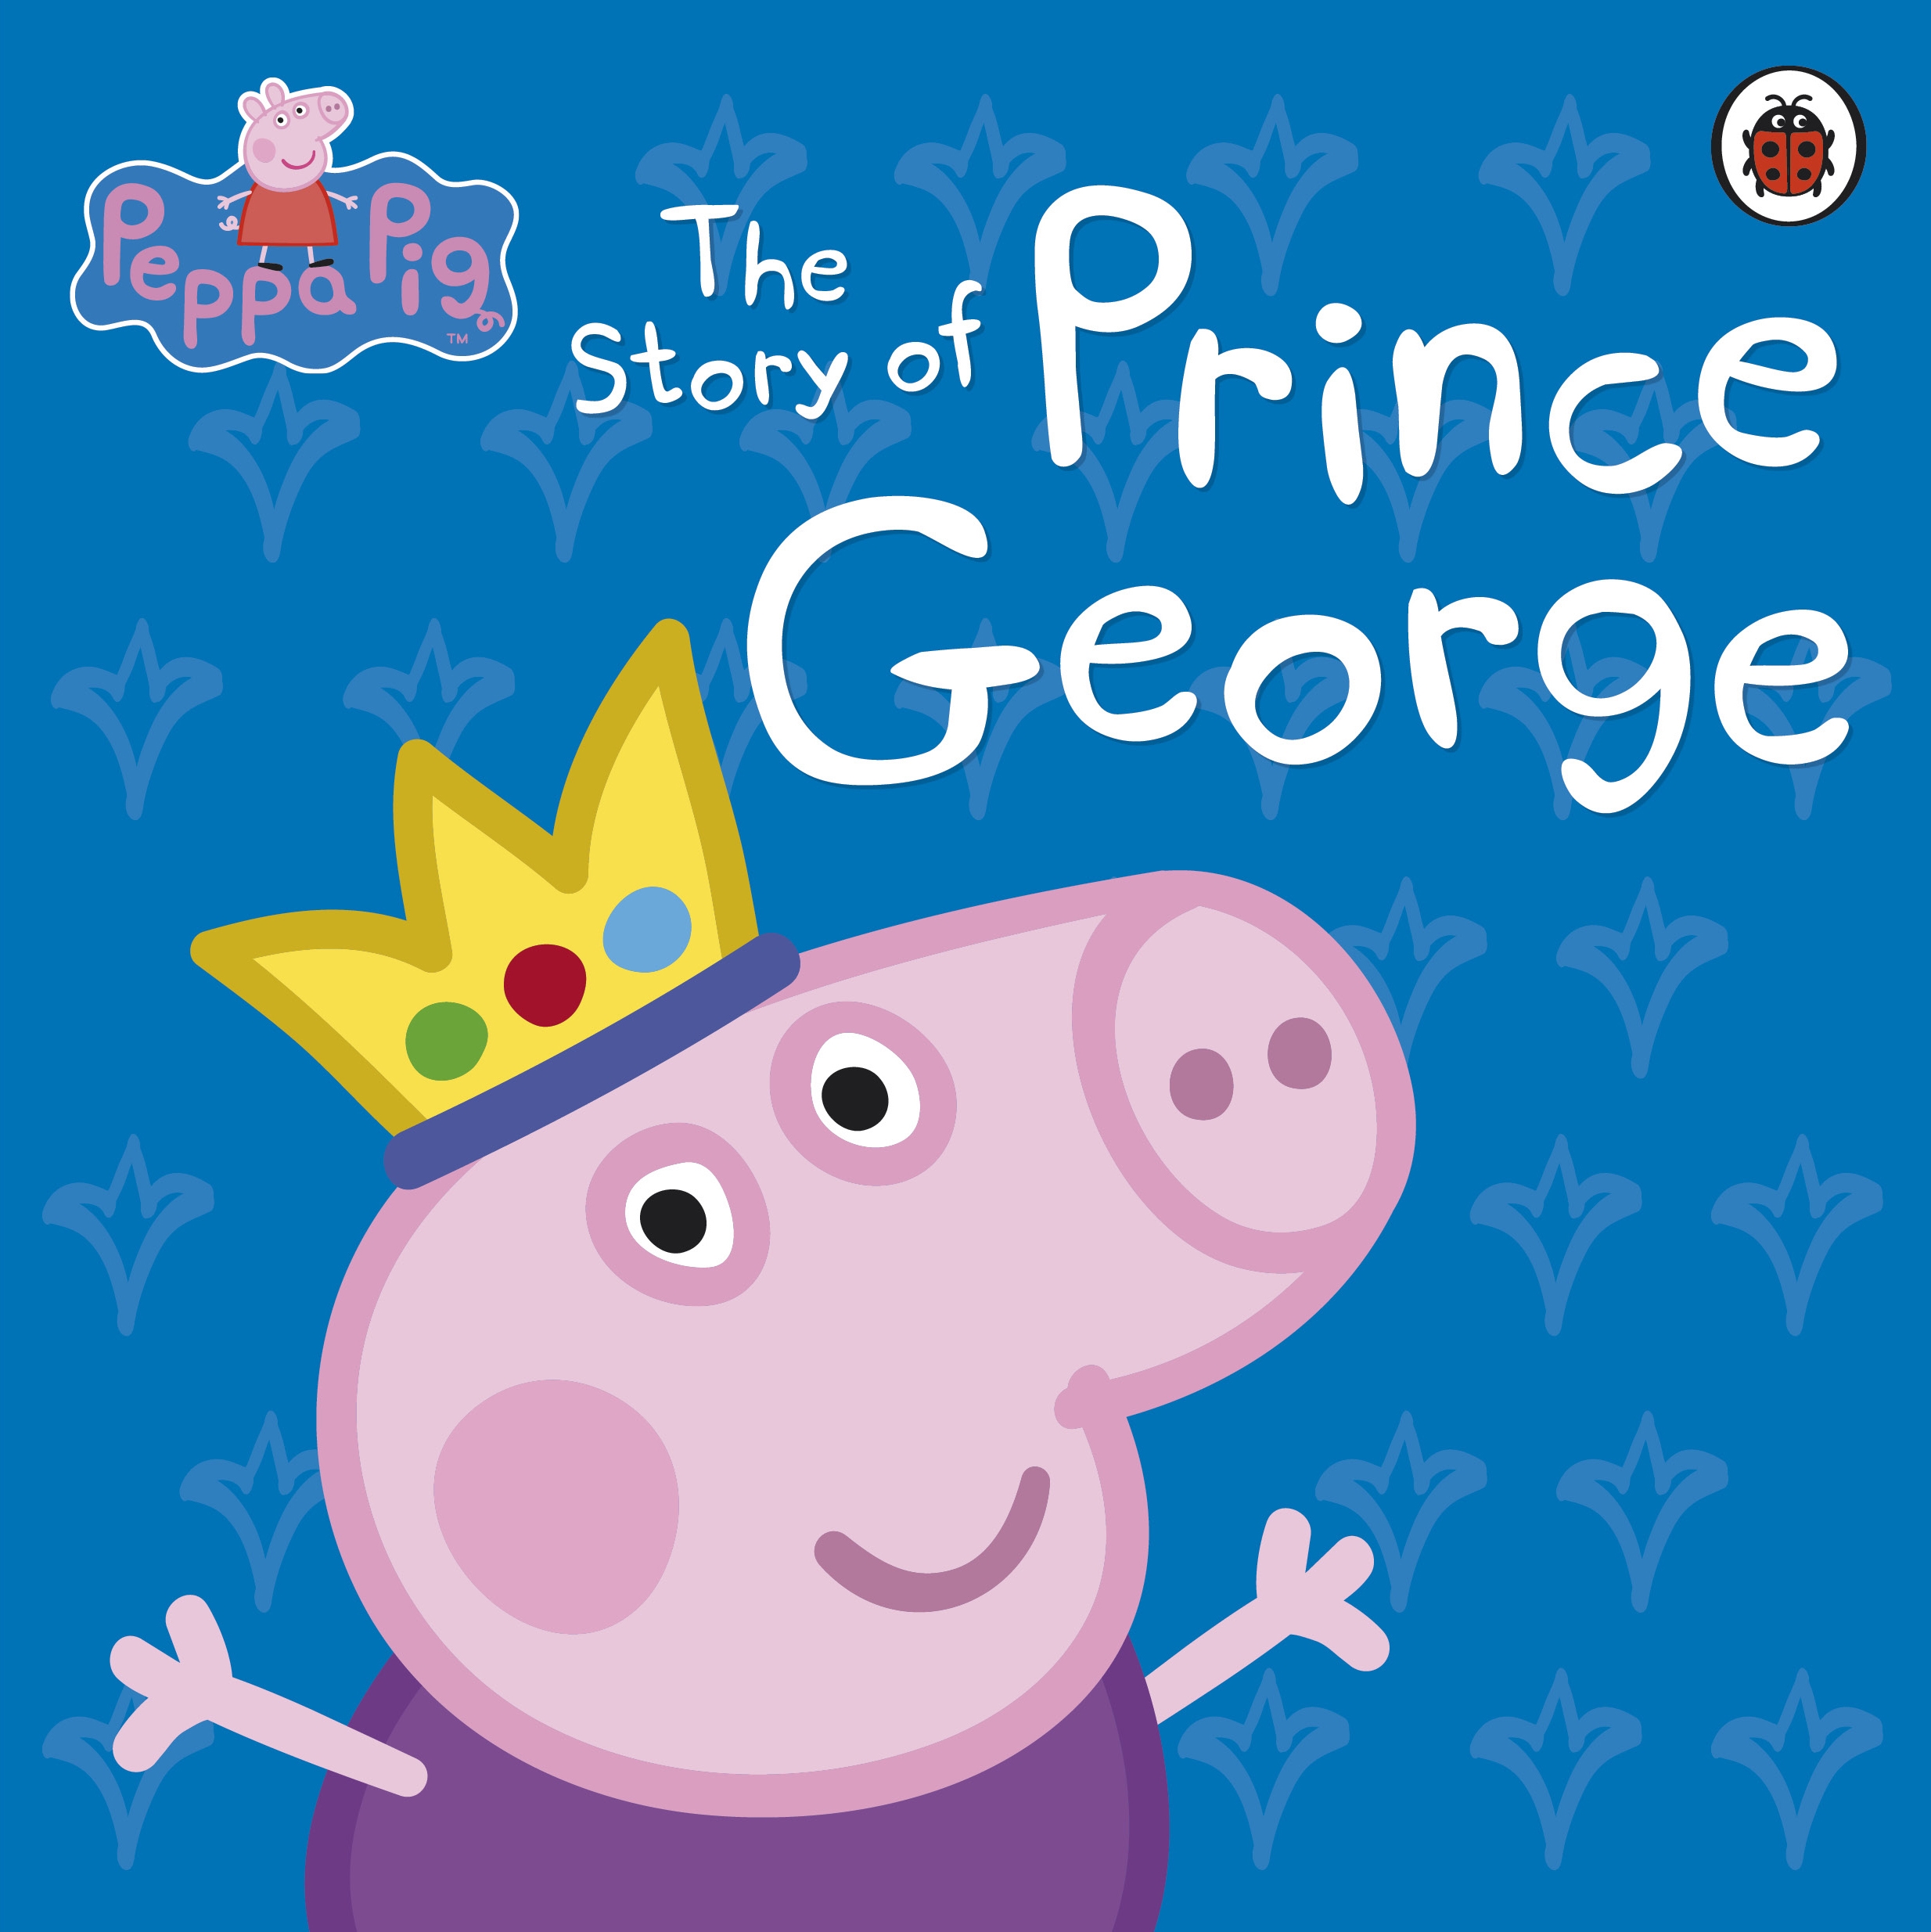 Peppa Pig The Story of Prince George